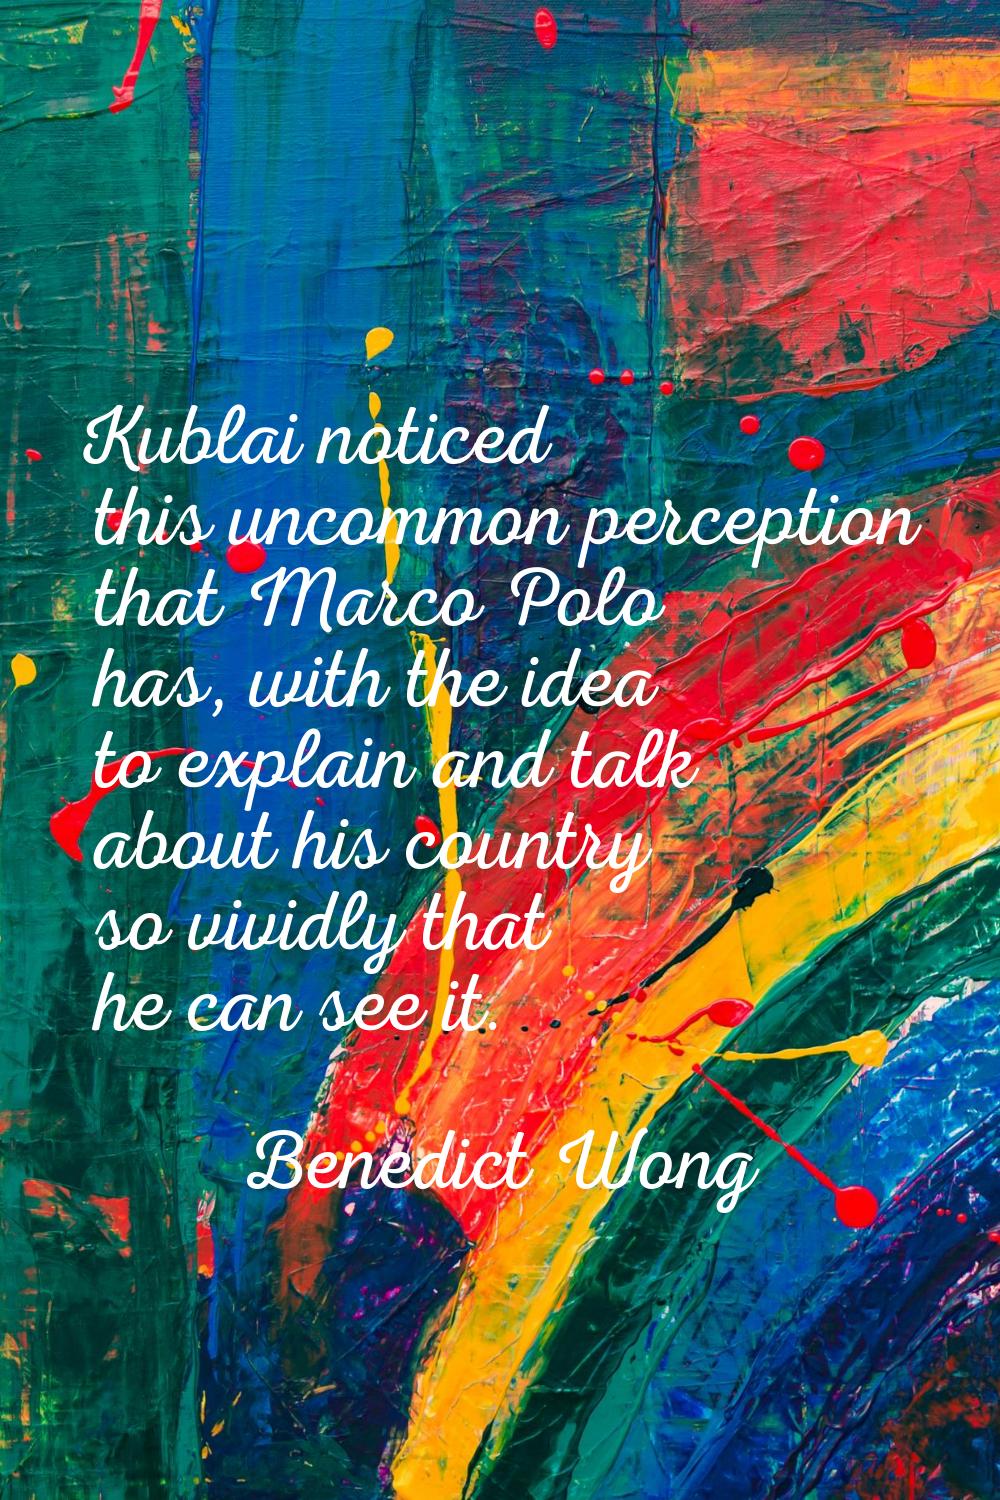 Kublai noticed this uncommon perception that Marco Polo has, with the idea to explain and talk abou